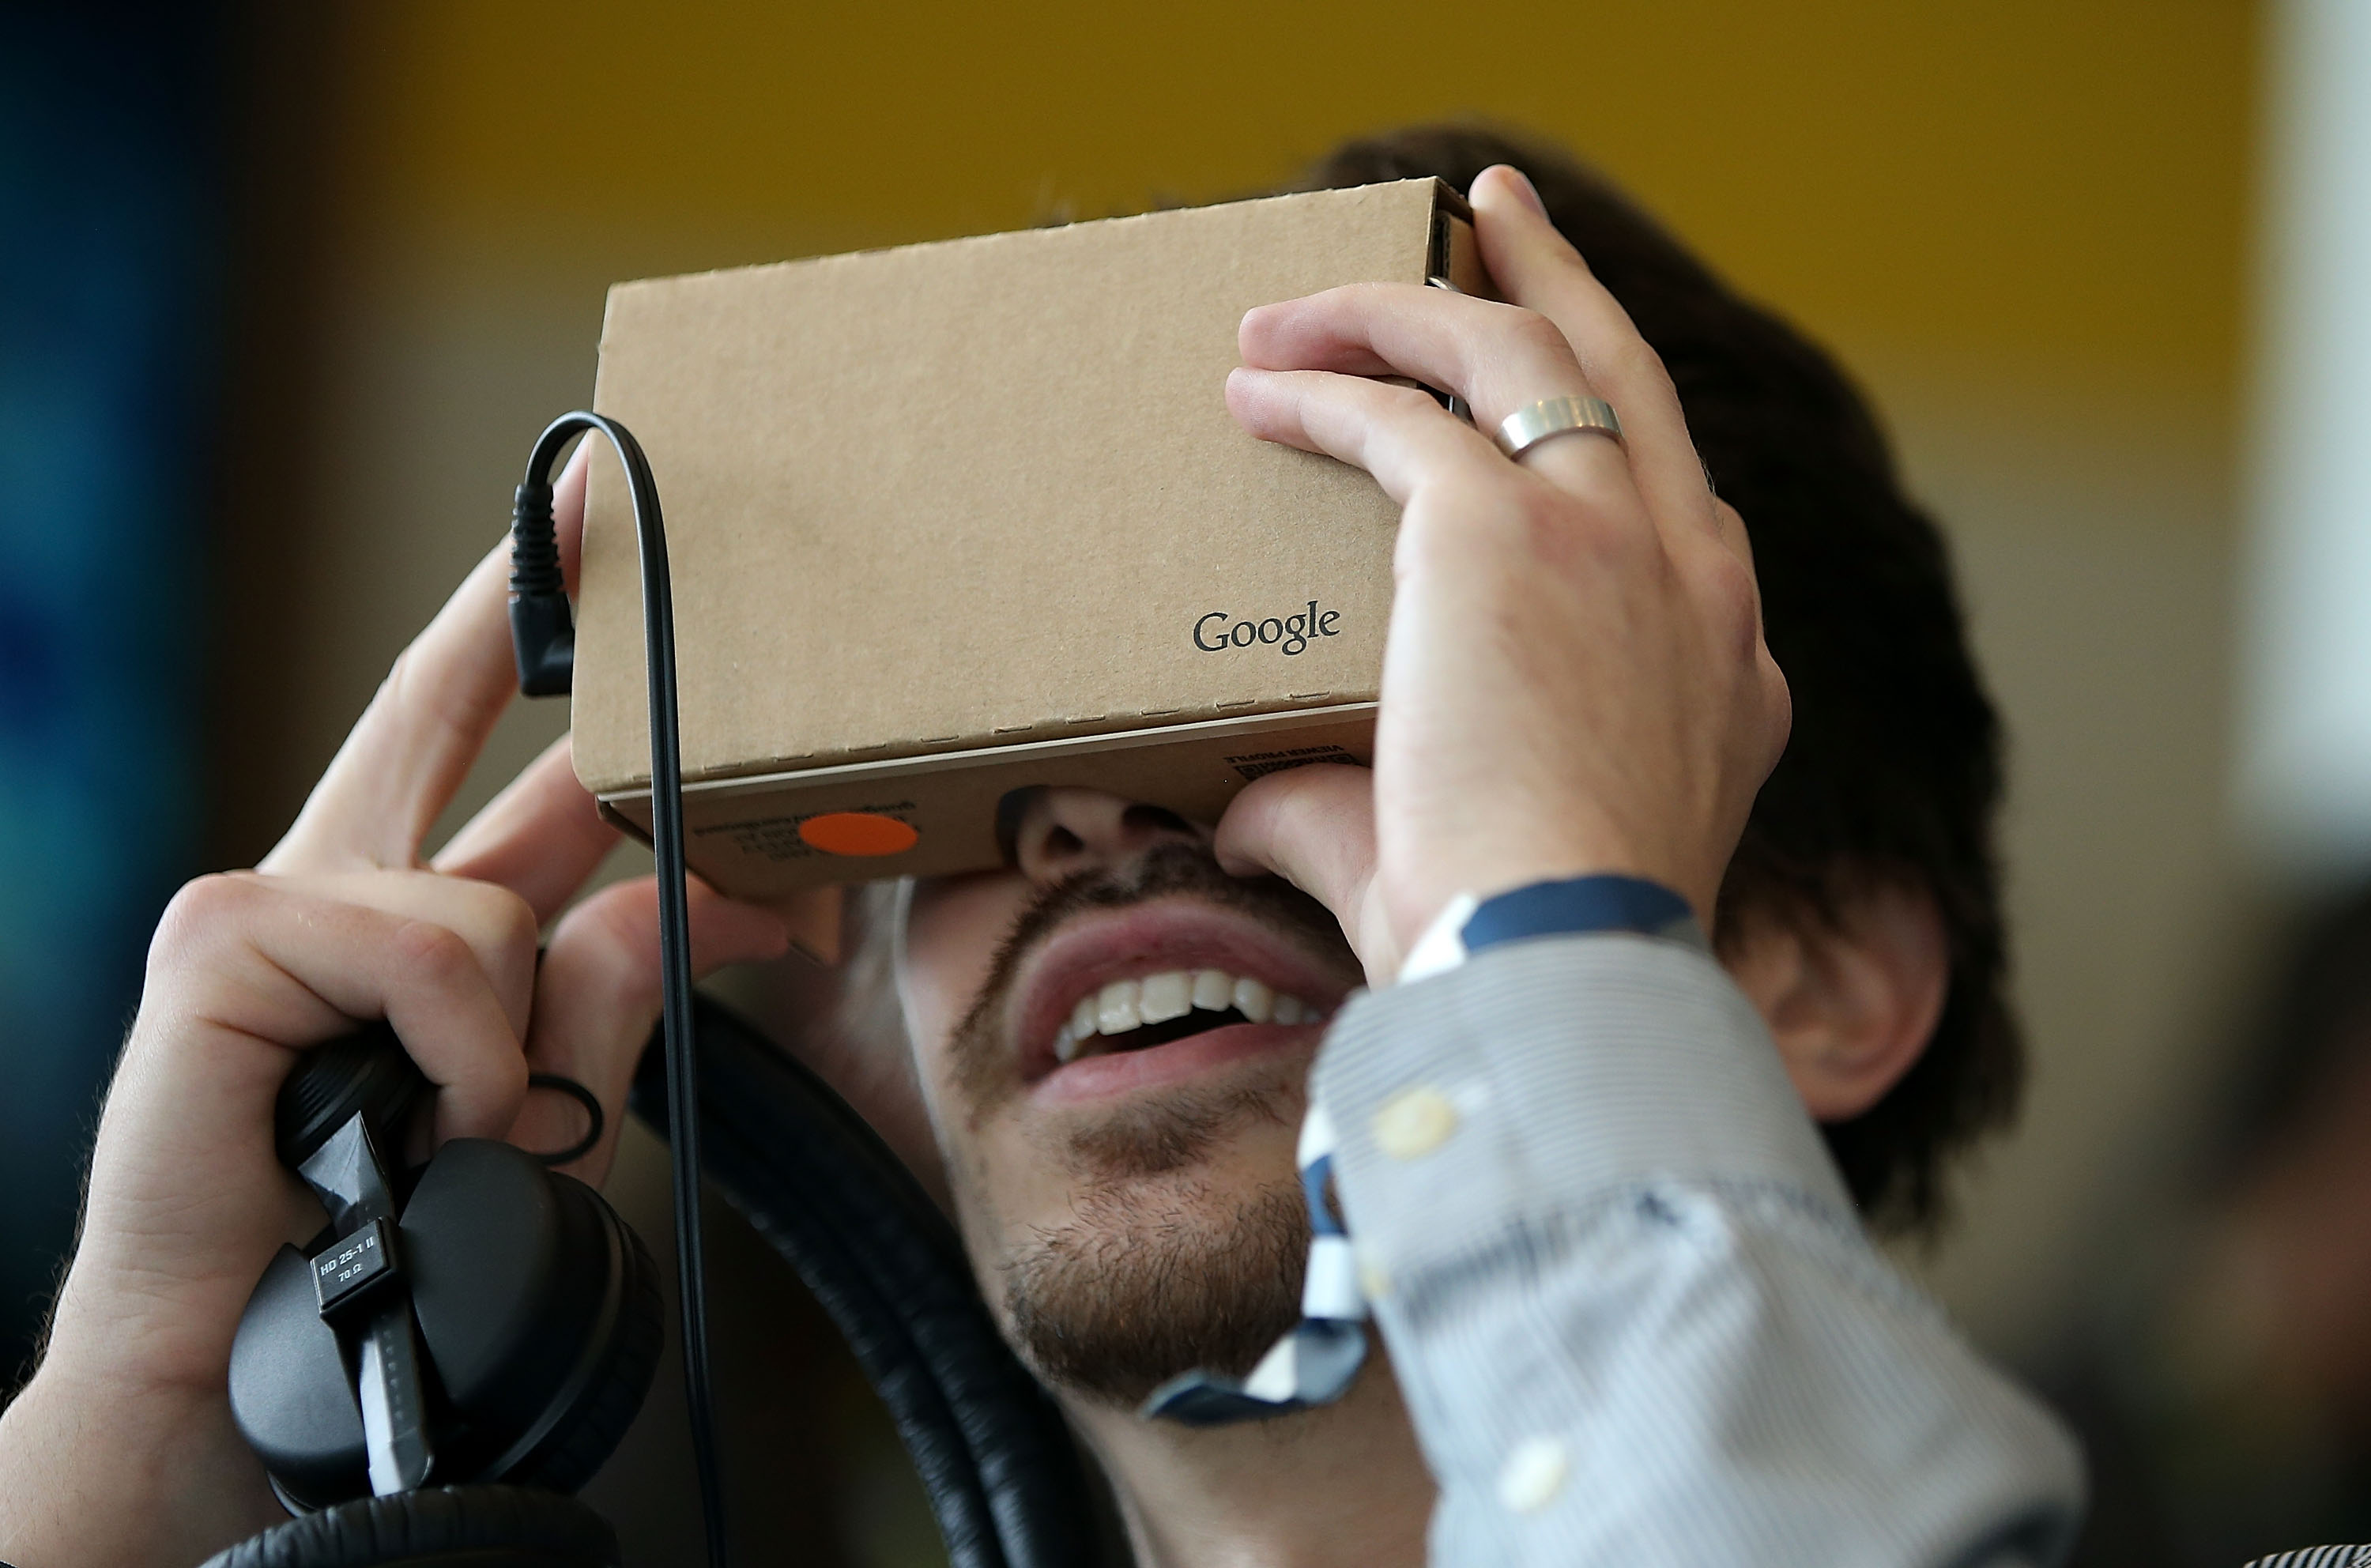 An attendee inspects Google Cardboard during the 2015 Google I/O conference on May 28, 2015 in San Francisco, Calif. (Justin Sullivan—Getty Images)